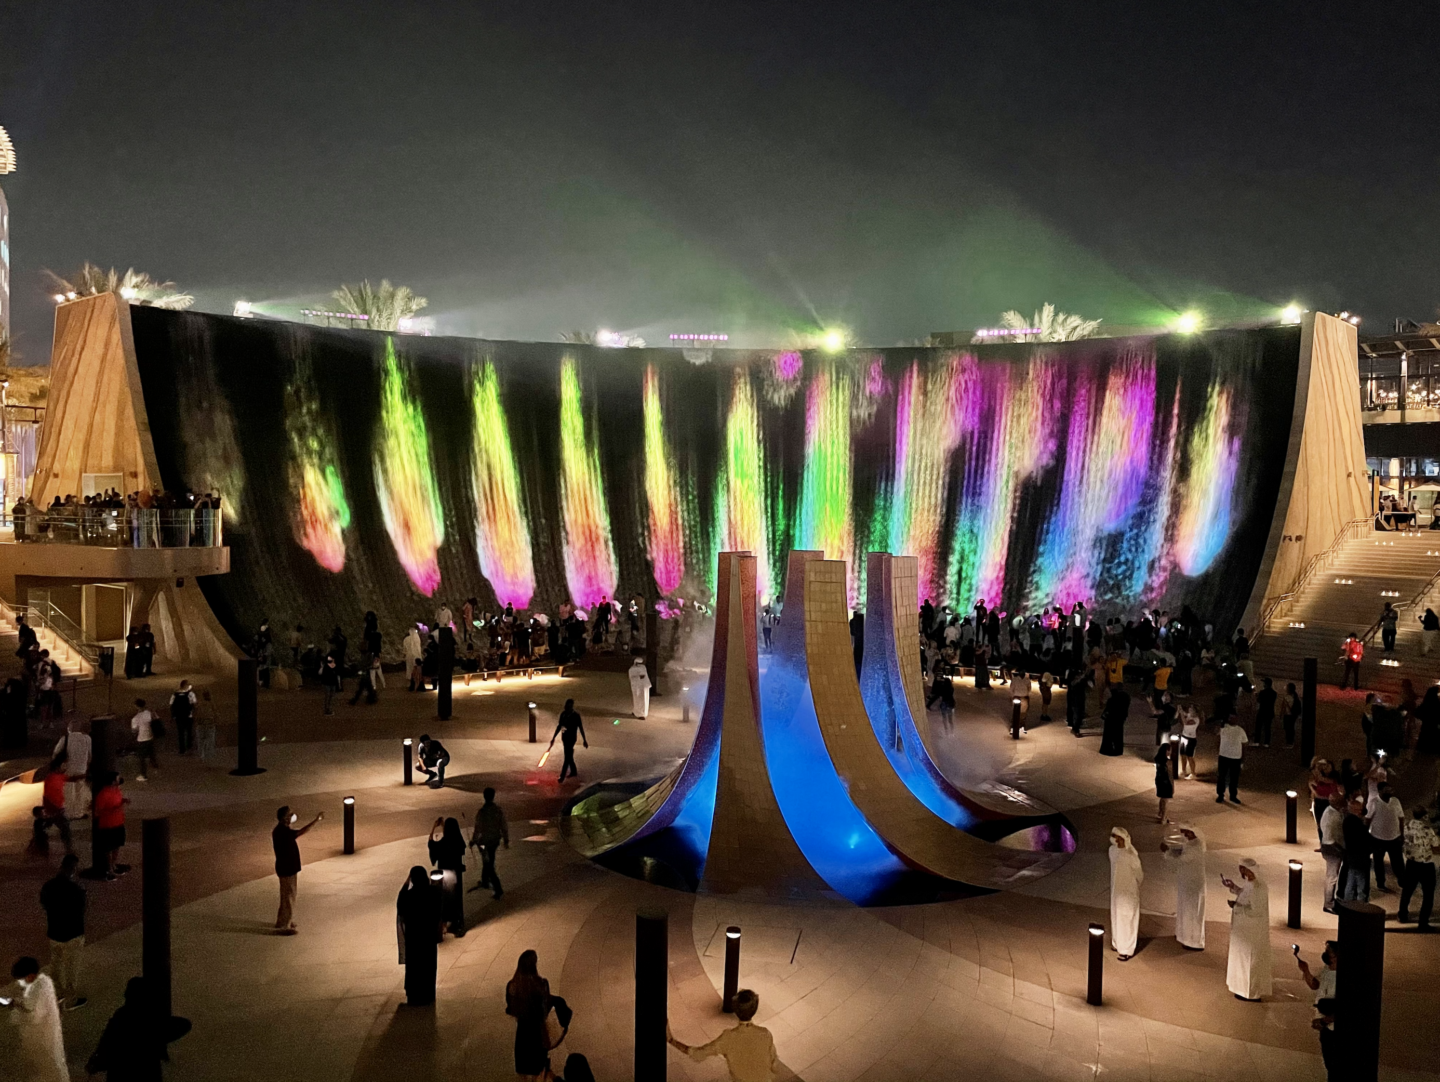 Surreal: the gravity-defying water feature at Expo 2020 Dubai